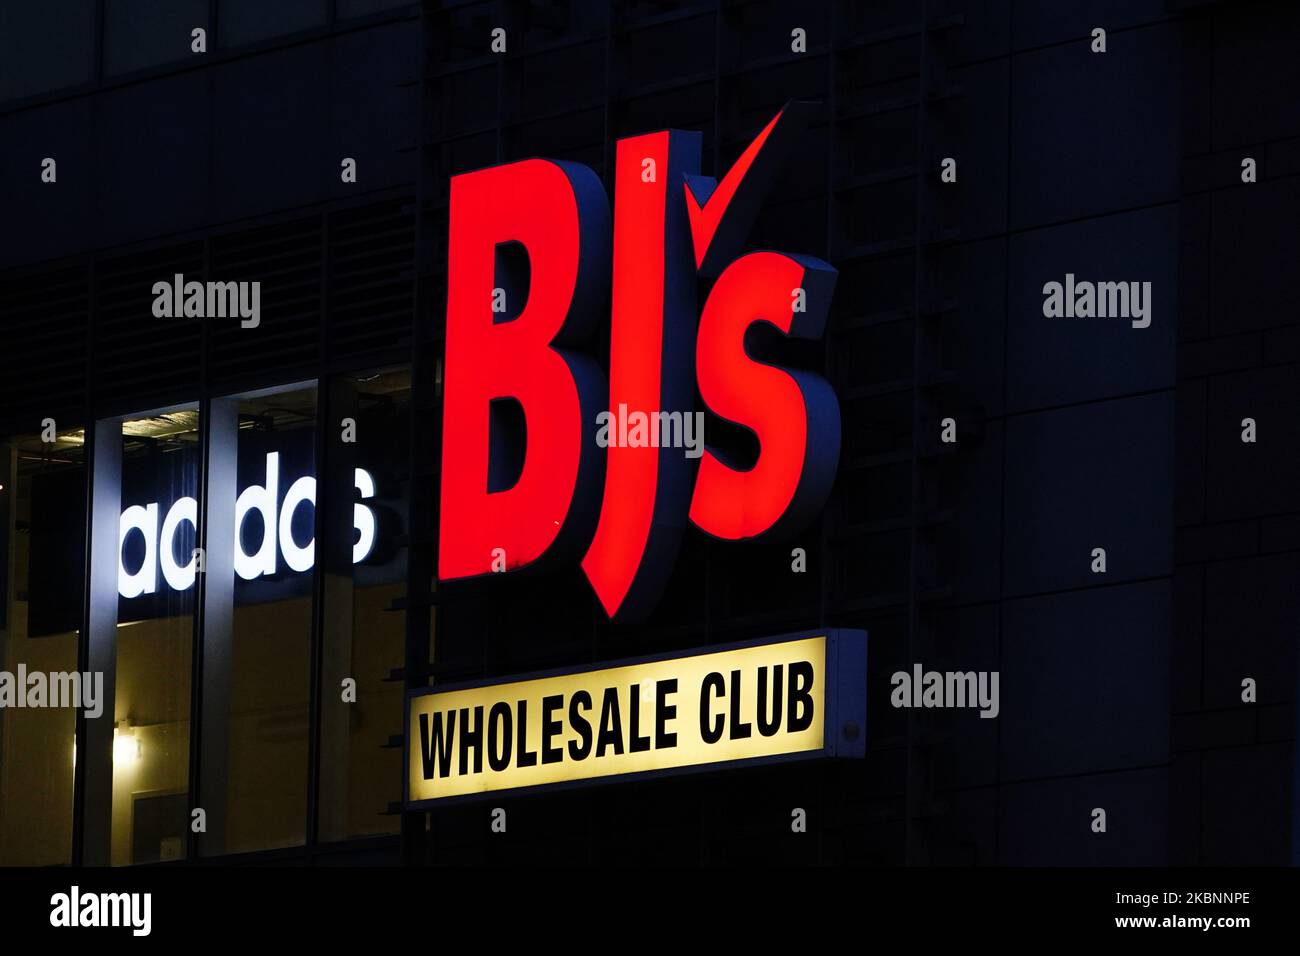 A view of BJ’s Wholesale Club during the coronavirus pandemic on May 12, 2020 in Queens borough of New York City. COVID-19 has spread to most countries around the world, claiming over 270,000 lives with over 3.9 million infections reported. (Photo by John Nacion/NurPhoto) Stock Photo